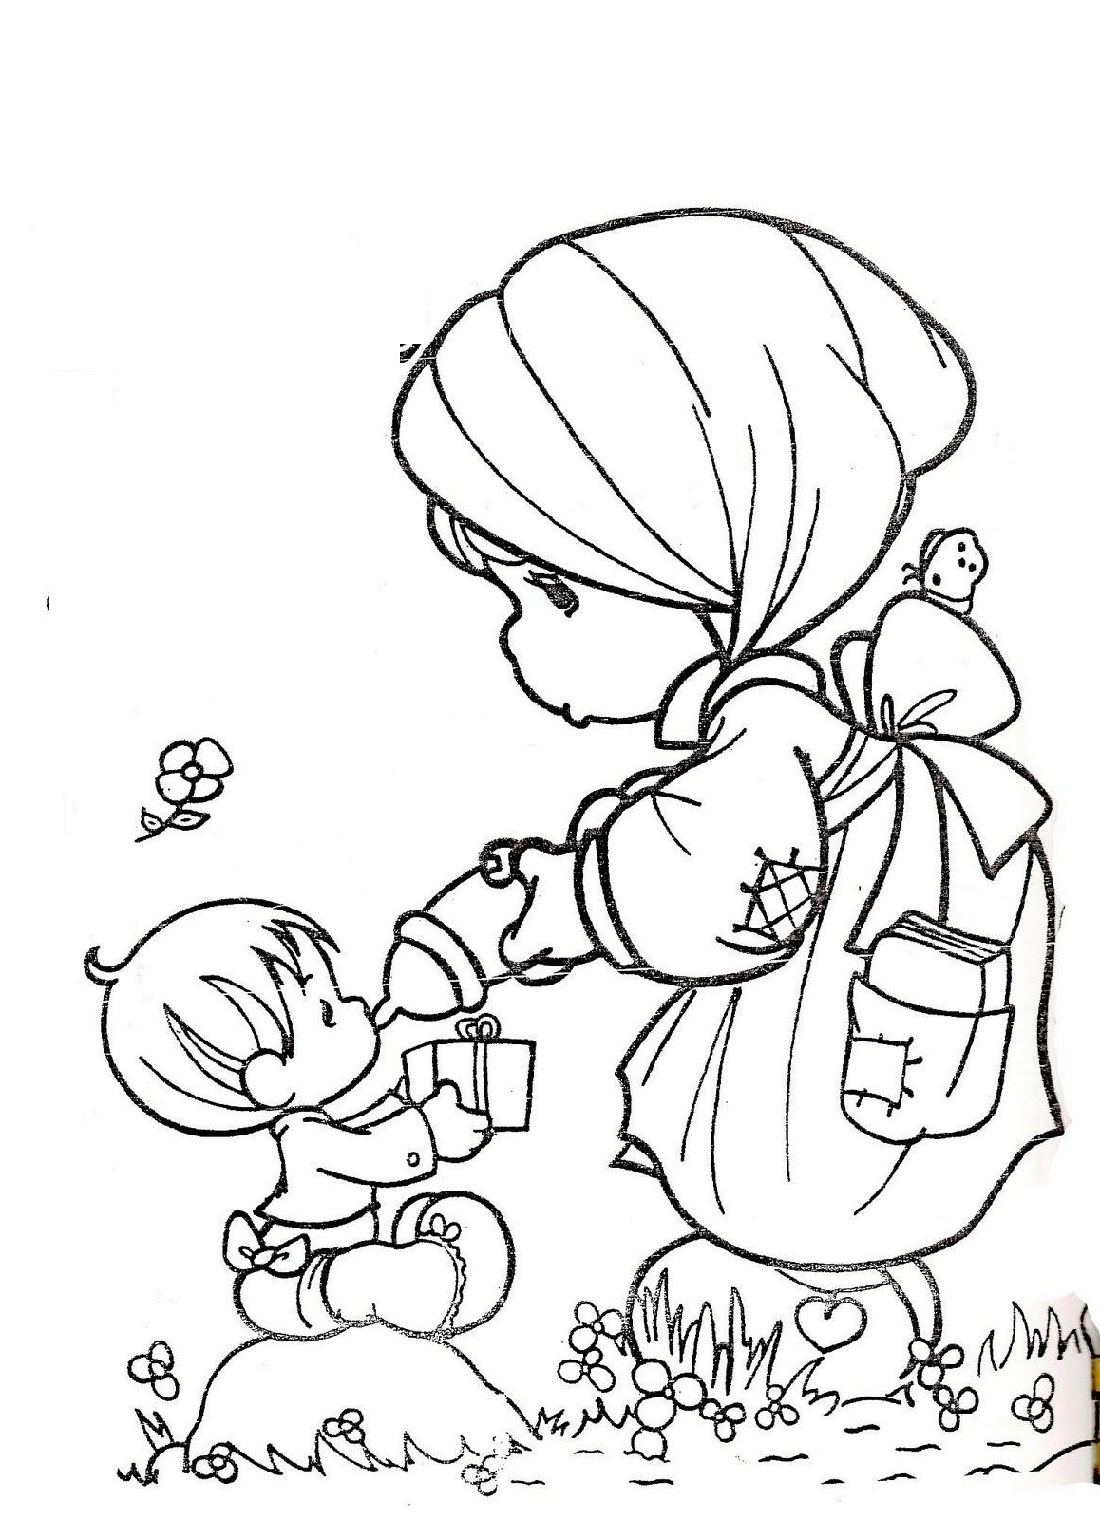 Precious Moments Coloring Pages To Print | K5 Worksheets